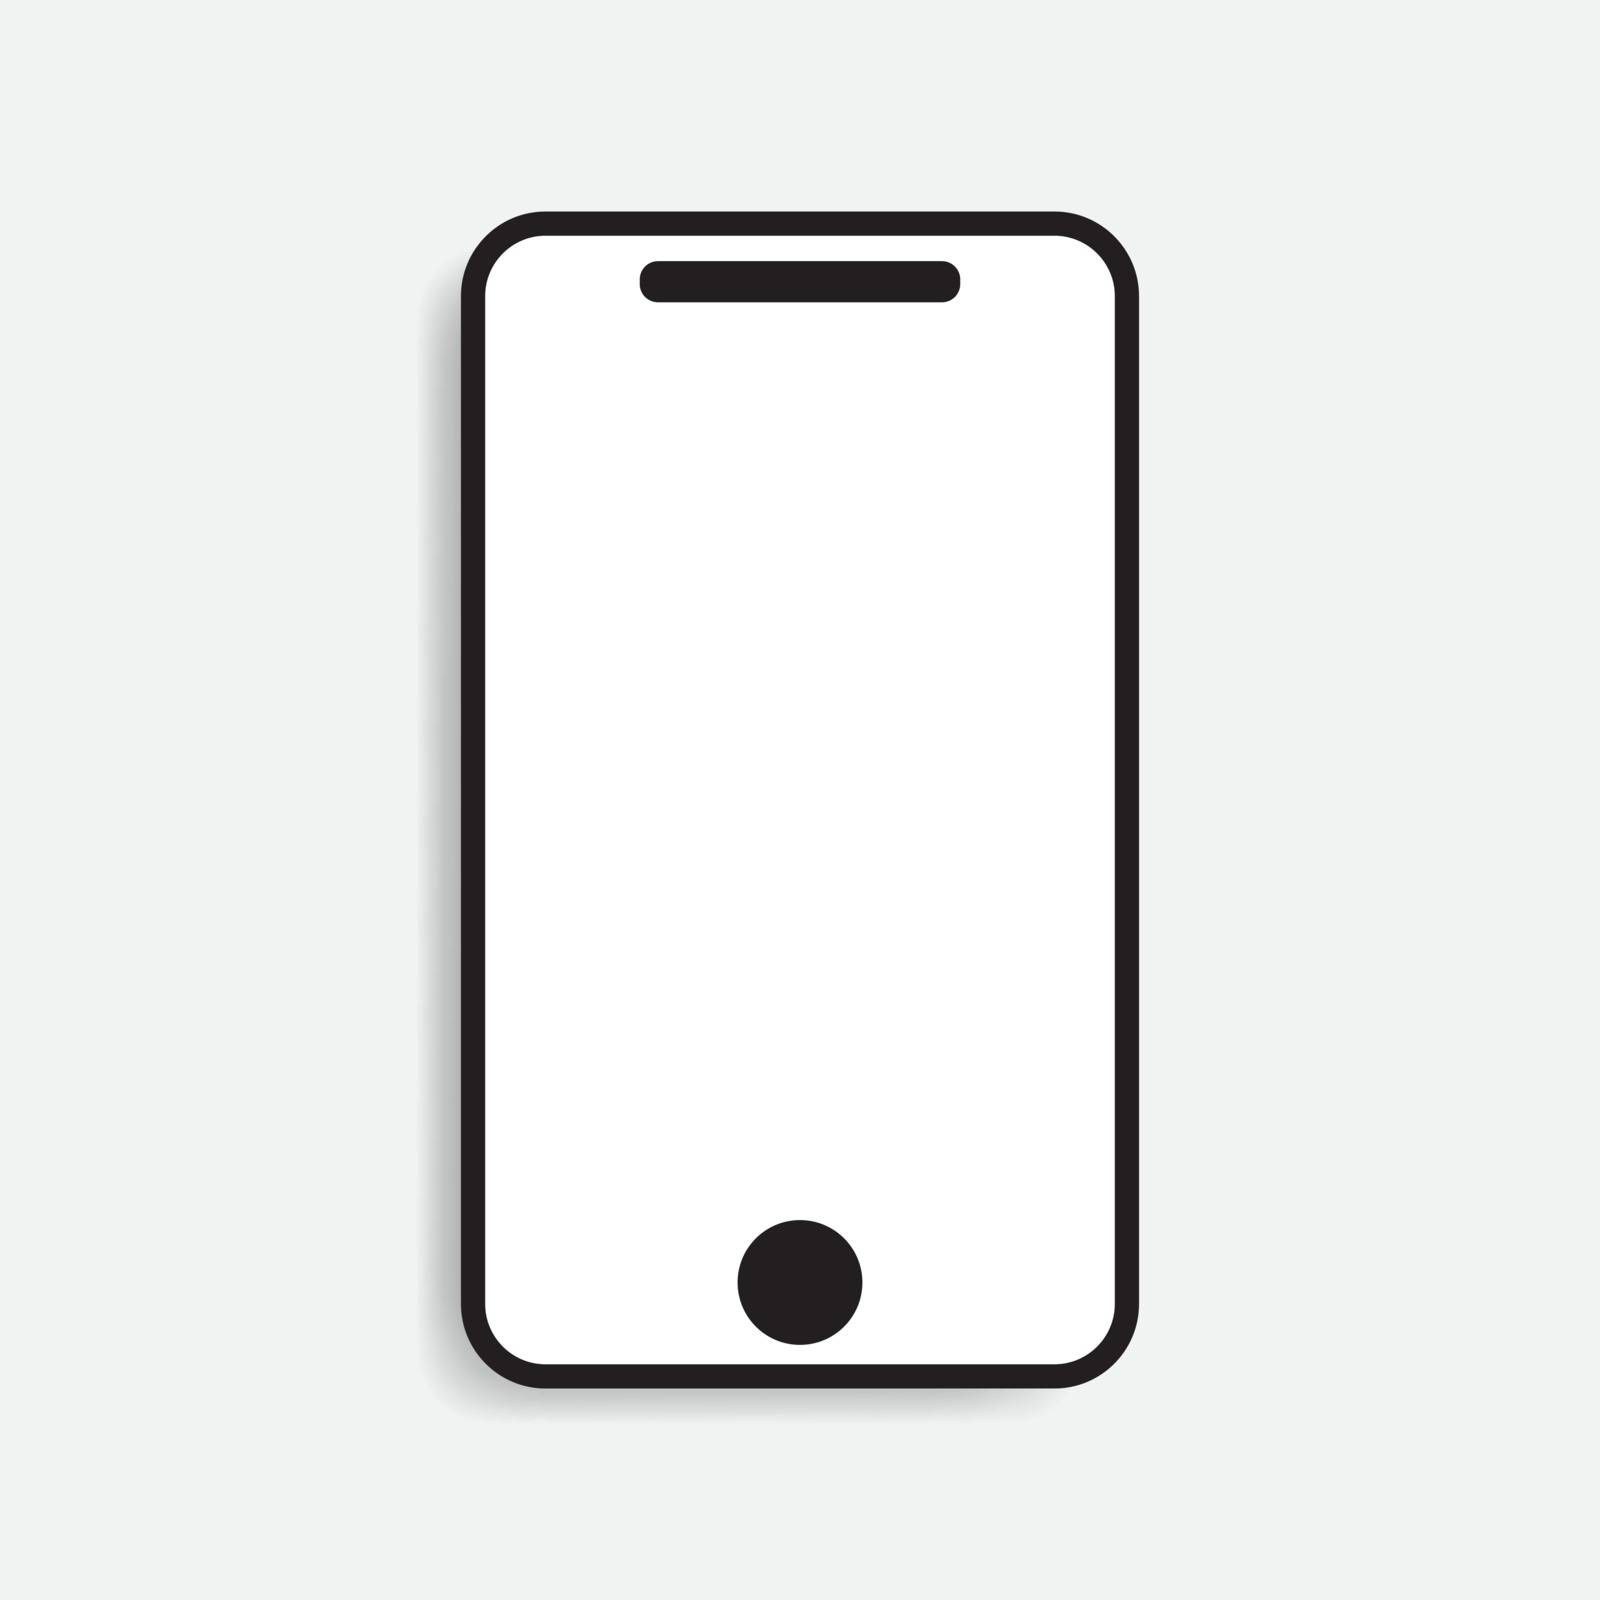 smartphone icon vector illustration with shadow. Linear flat style